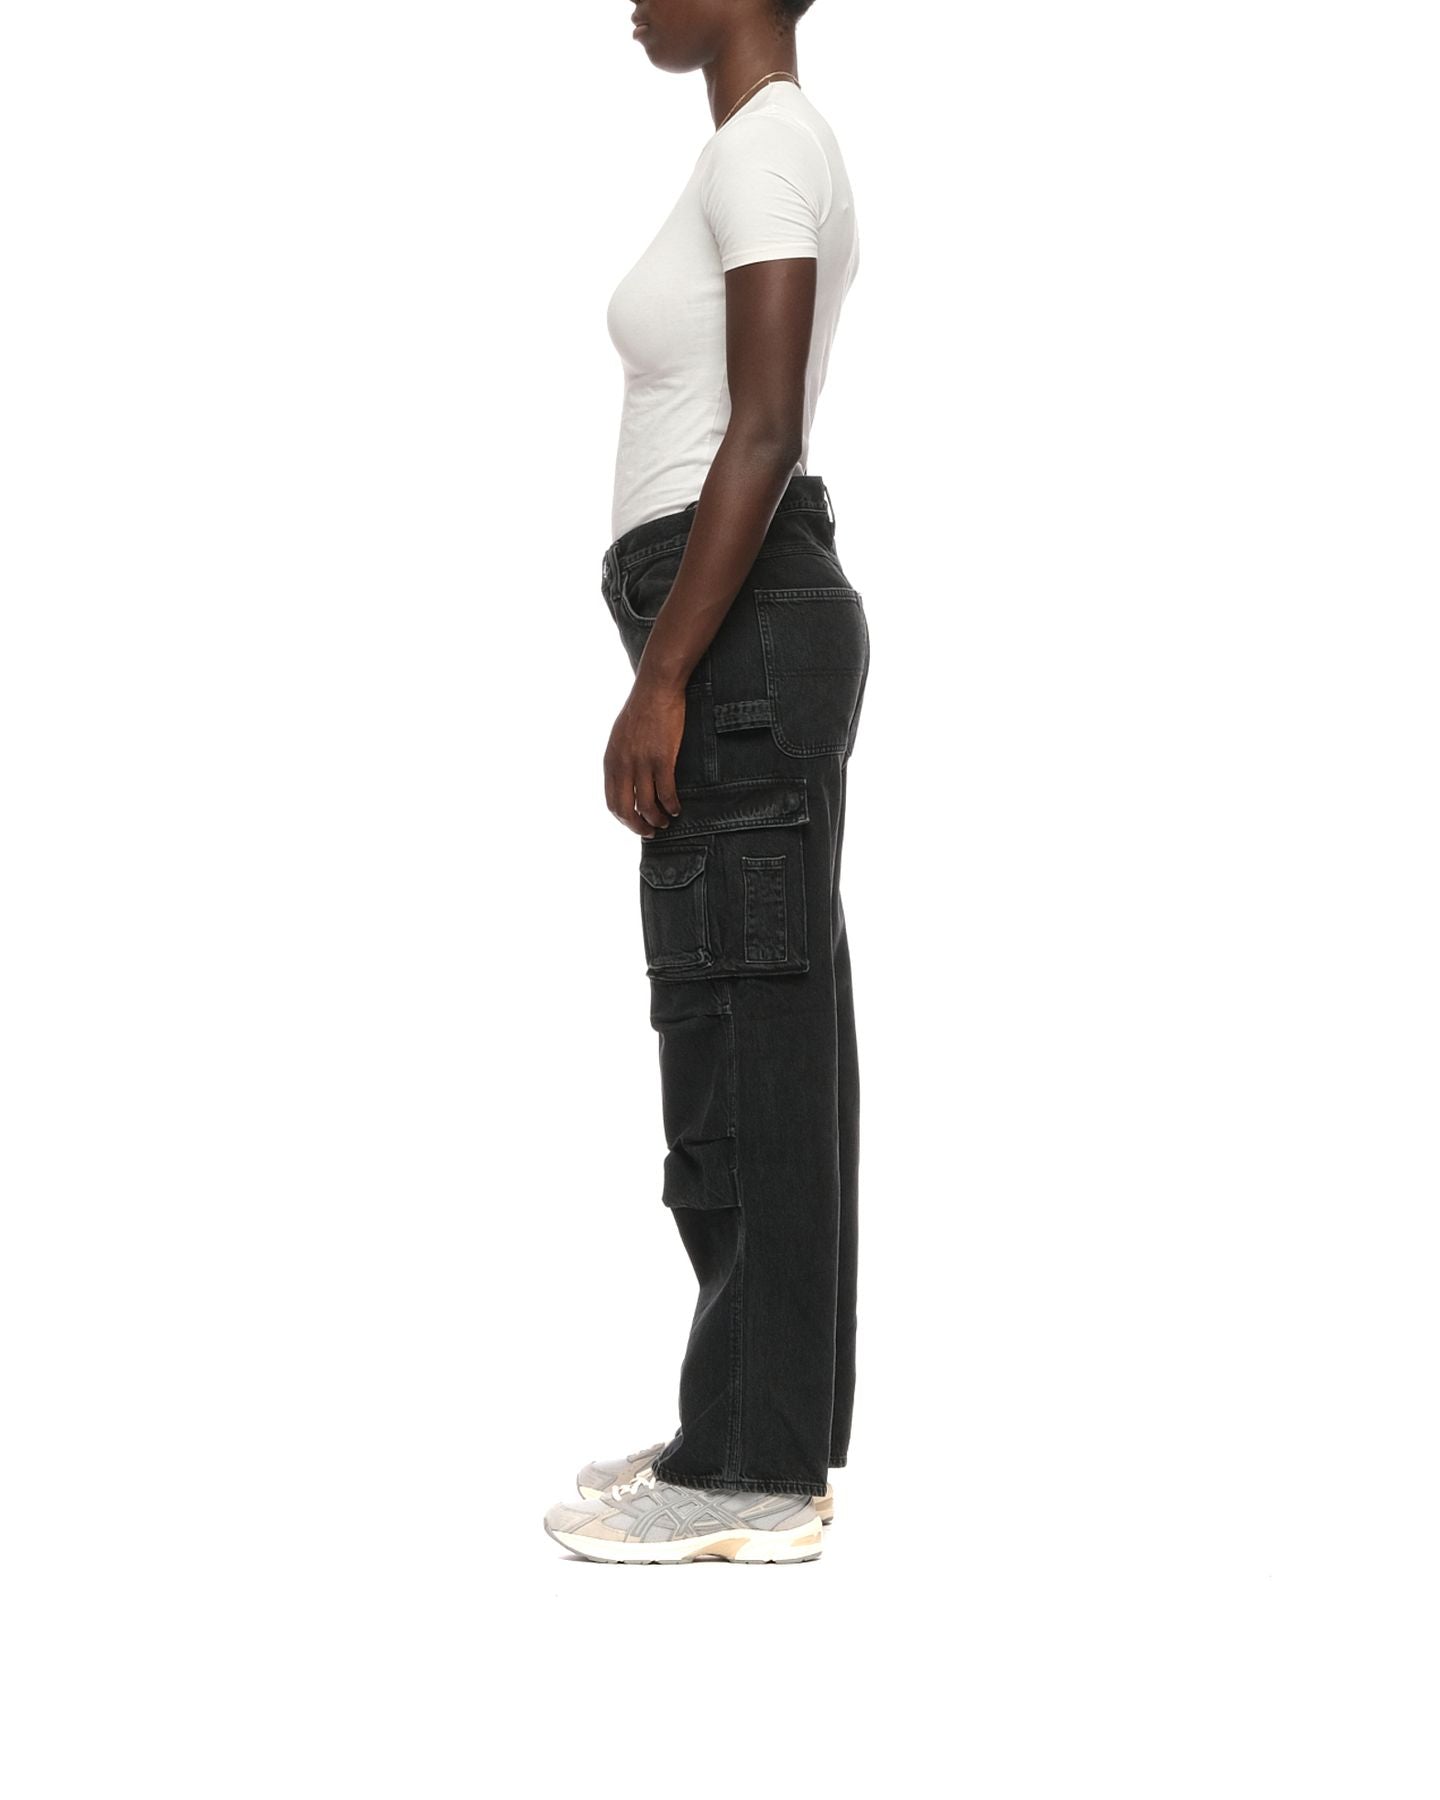 Jeans woman A9165 1557 SPIDER Agolde